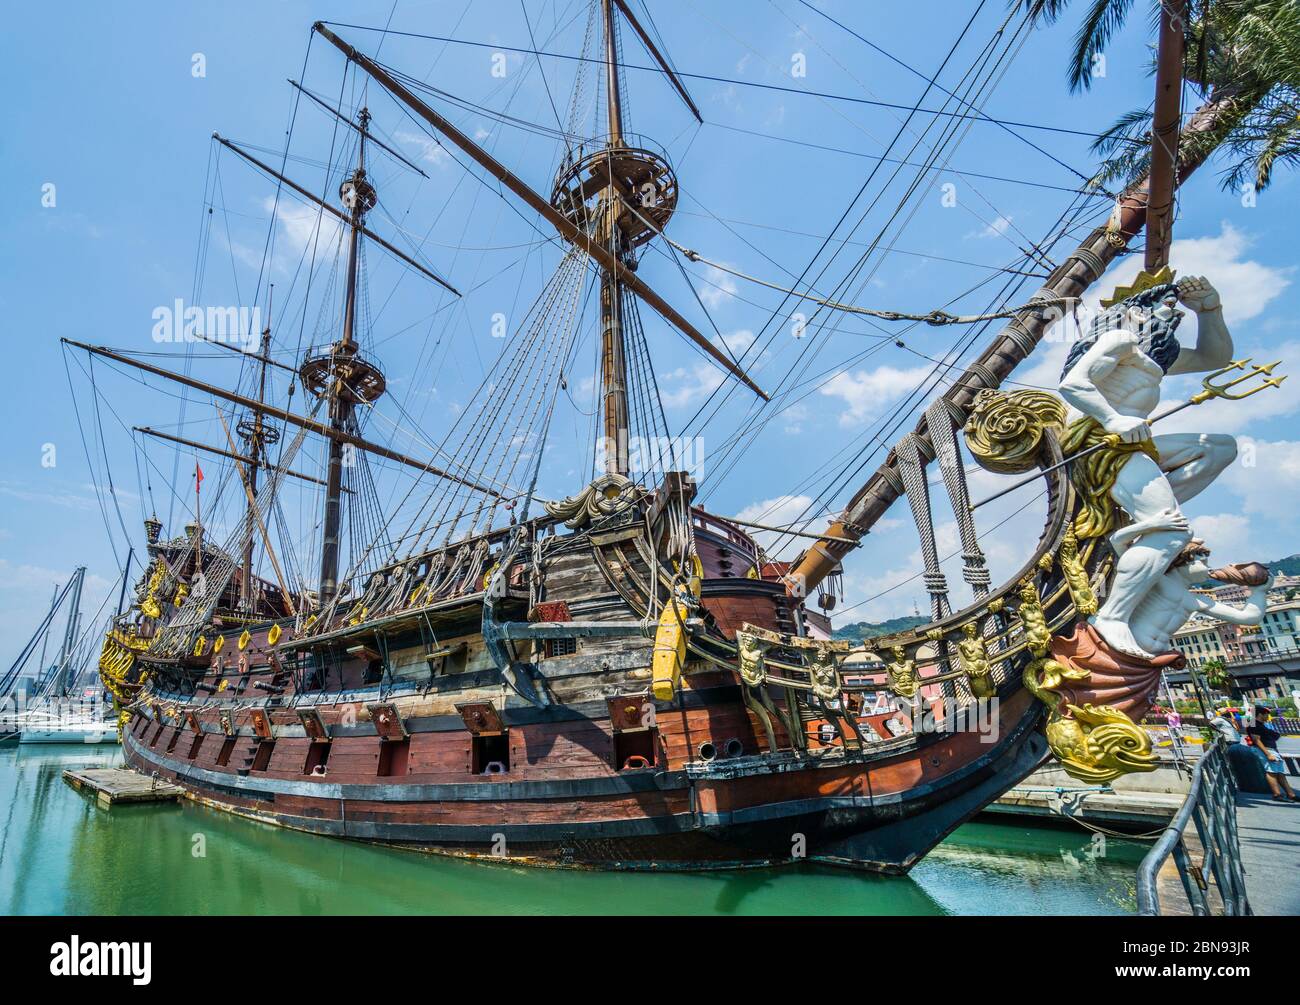 galeon 'Neptune', a replica of a 17th-century Spanish galleon, built for the 1985 film 'Pirates' moored in the Old Harbour of Genoa, Liguria, Italy Stock Photo